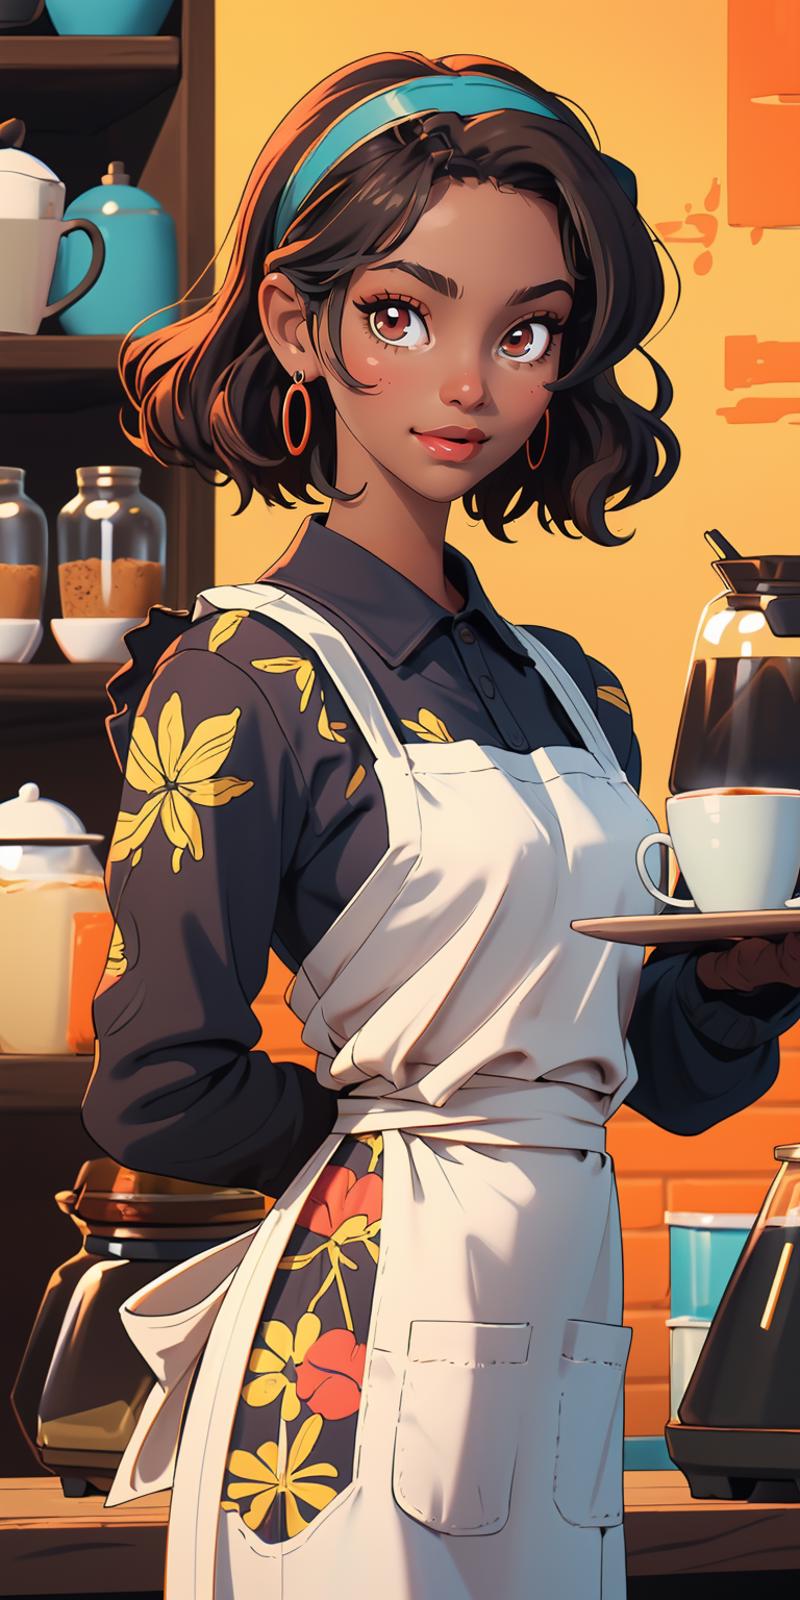 A cartoon illustration of a woman in an apron serving coffee.